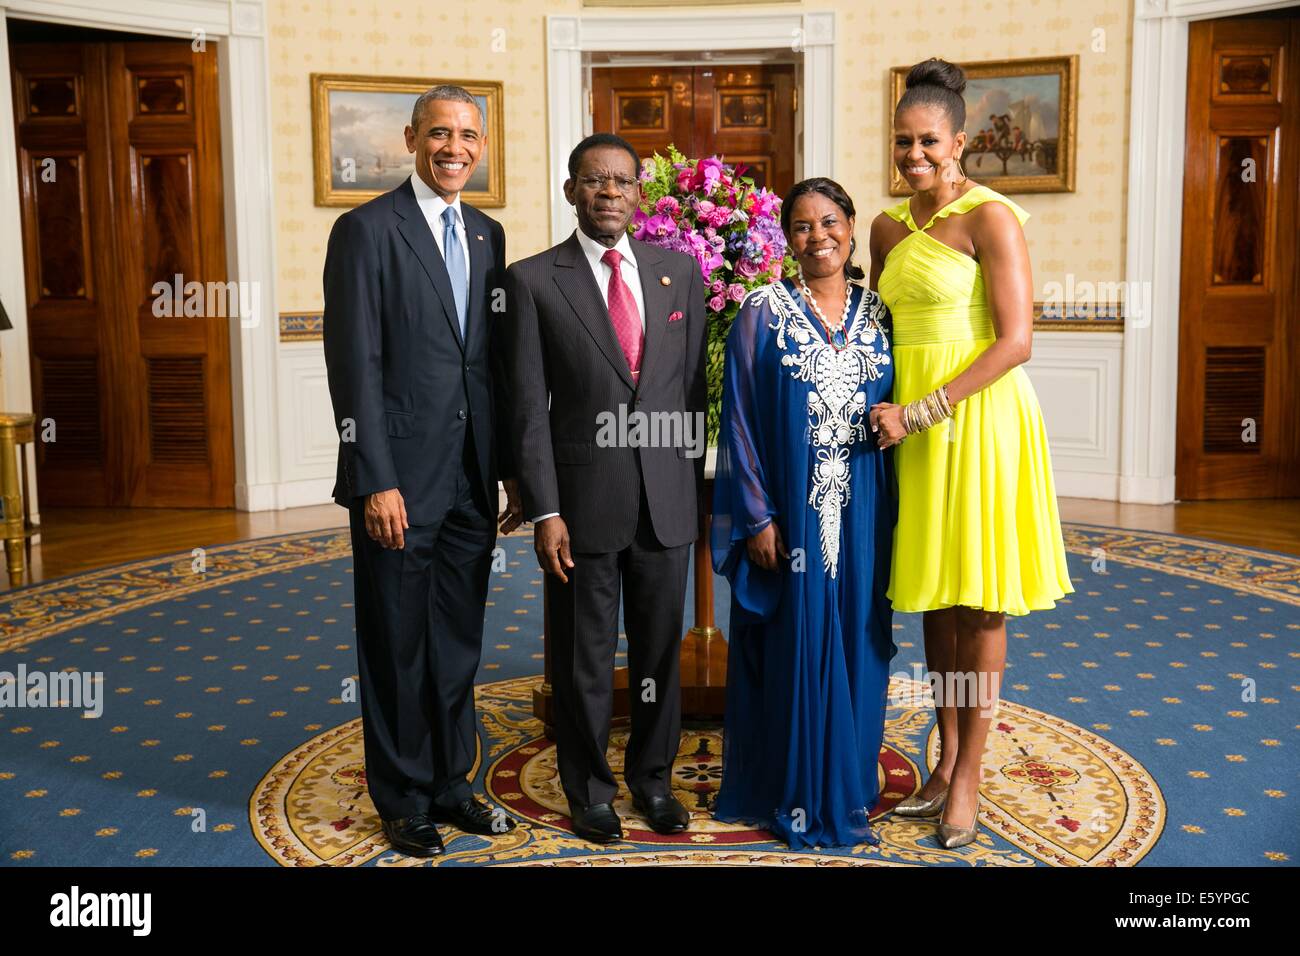 US President Barack Obama and First Lady Michelle Obama pose with Teodoro Obiang Nguema Mbasogo, President of the Republic of Equatorial Guinea, and his wife Constancia Mangue de Obiang, in the Blue Room of the White House before the U.S.-Africa Leaders Summit dinner August 5, 2014 in Washington, DC. Stock Photo